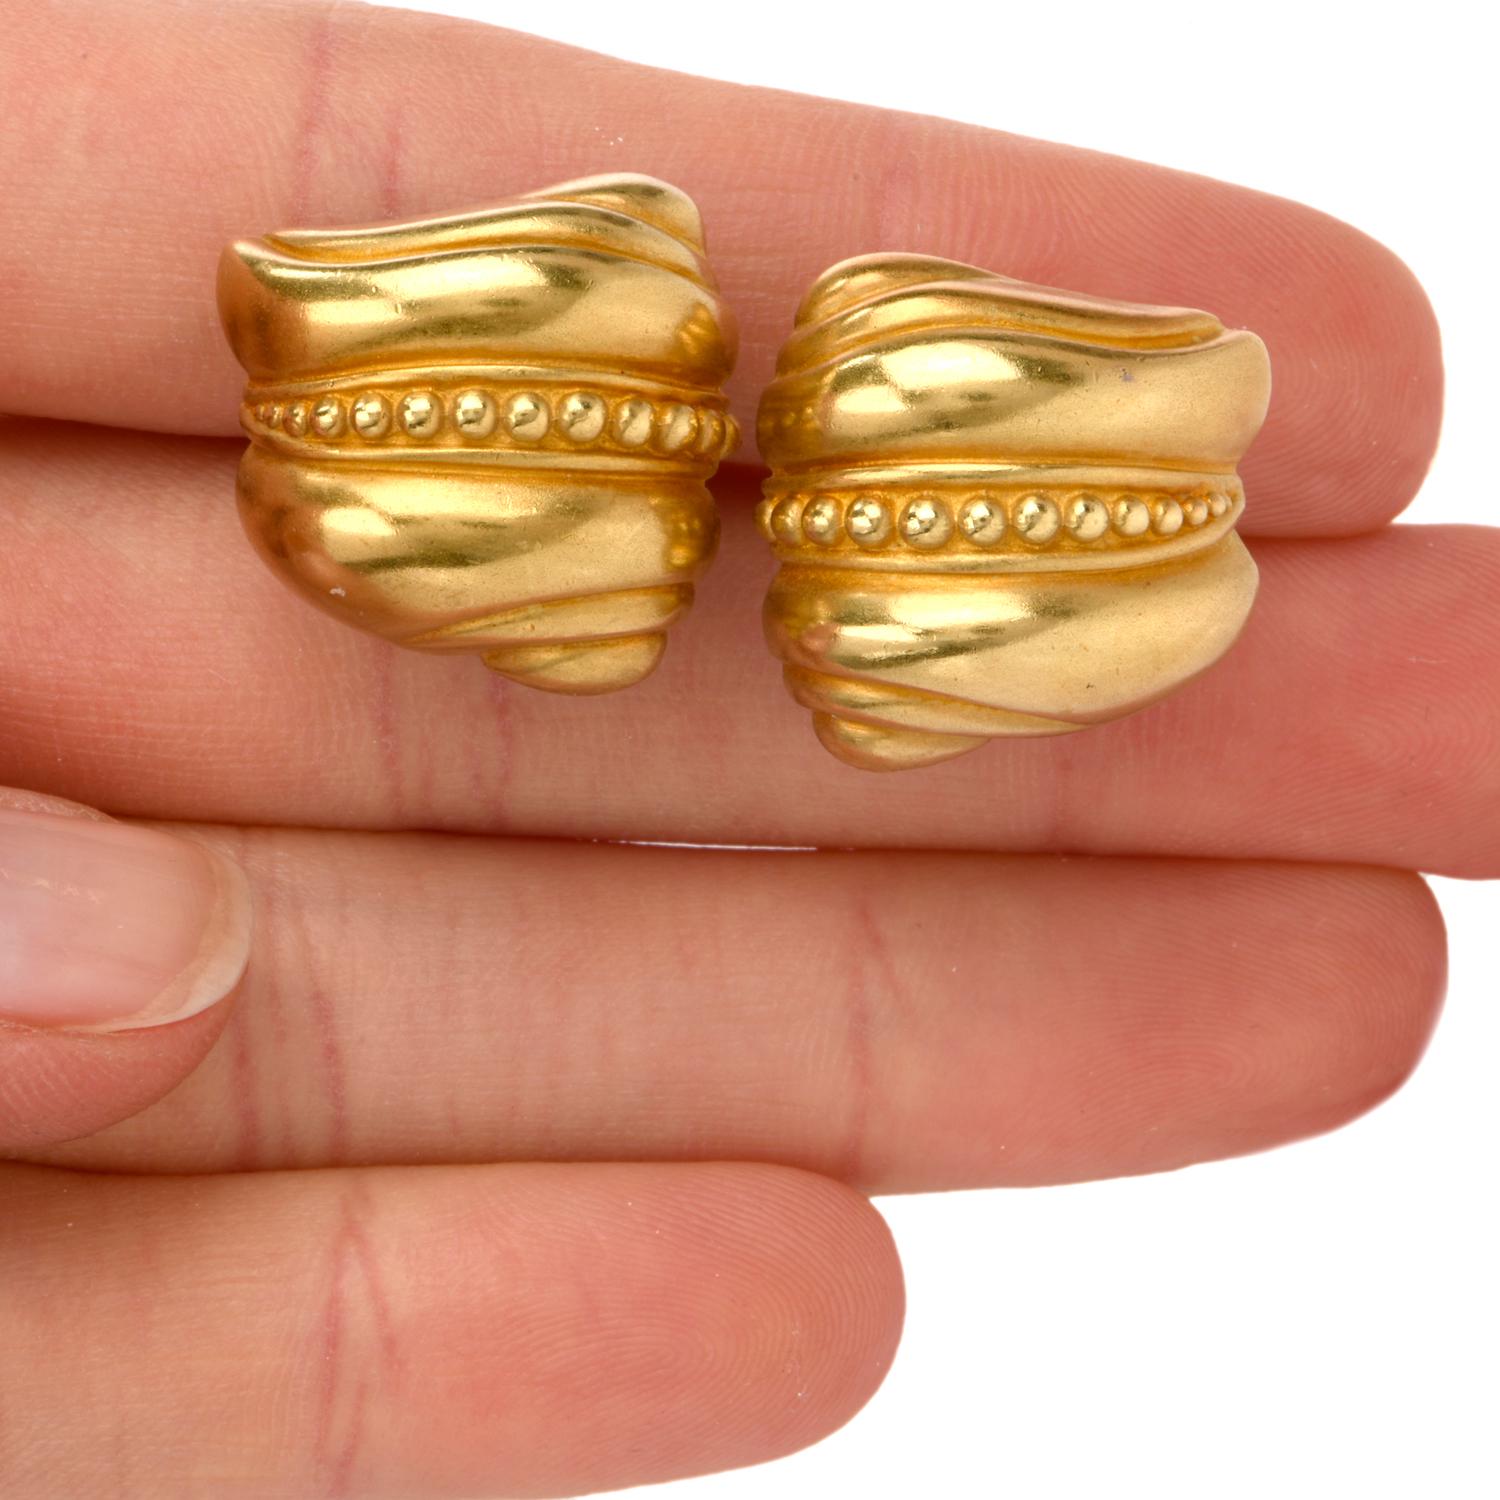 These classic Barry Kieselstein-Cord's designer shell and 'caviar' earrings are crafted in 18-karat yellow gold. Circa 1980's, they are designed to simulate swirled shells with a row of spheres in the center. Earrings weigh 18.2 grams and measure